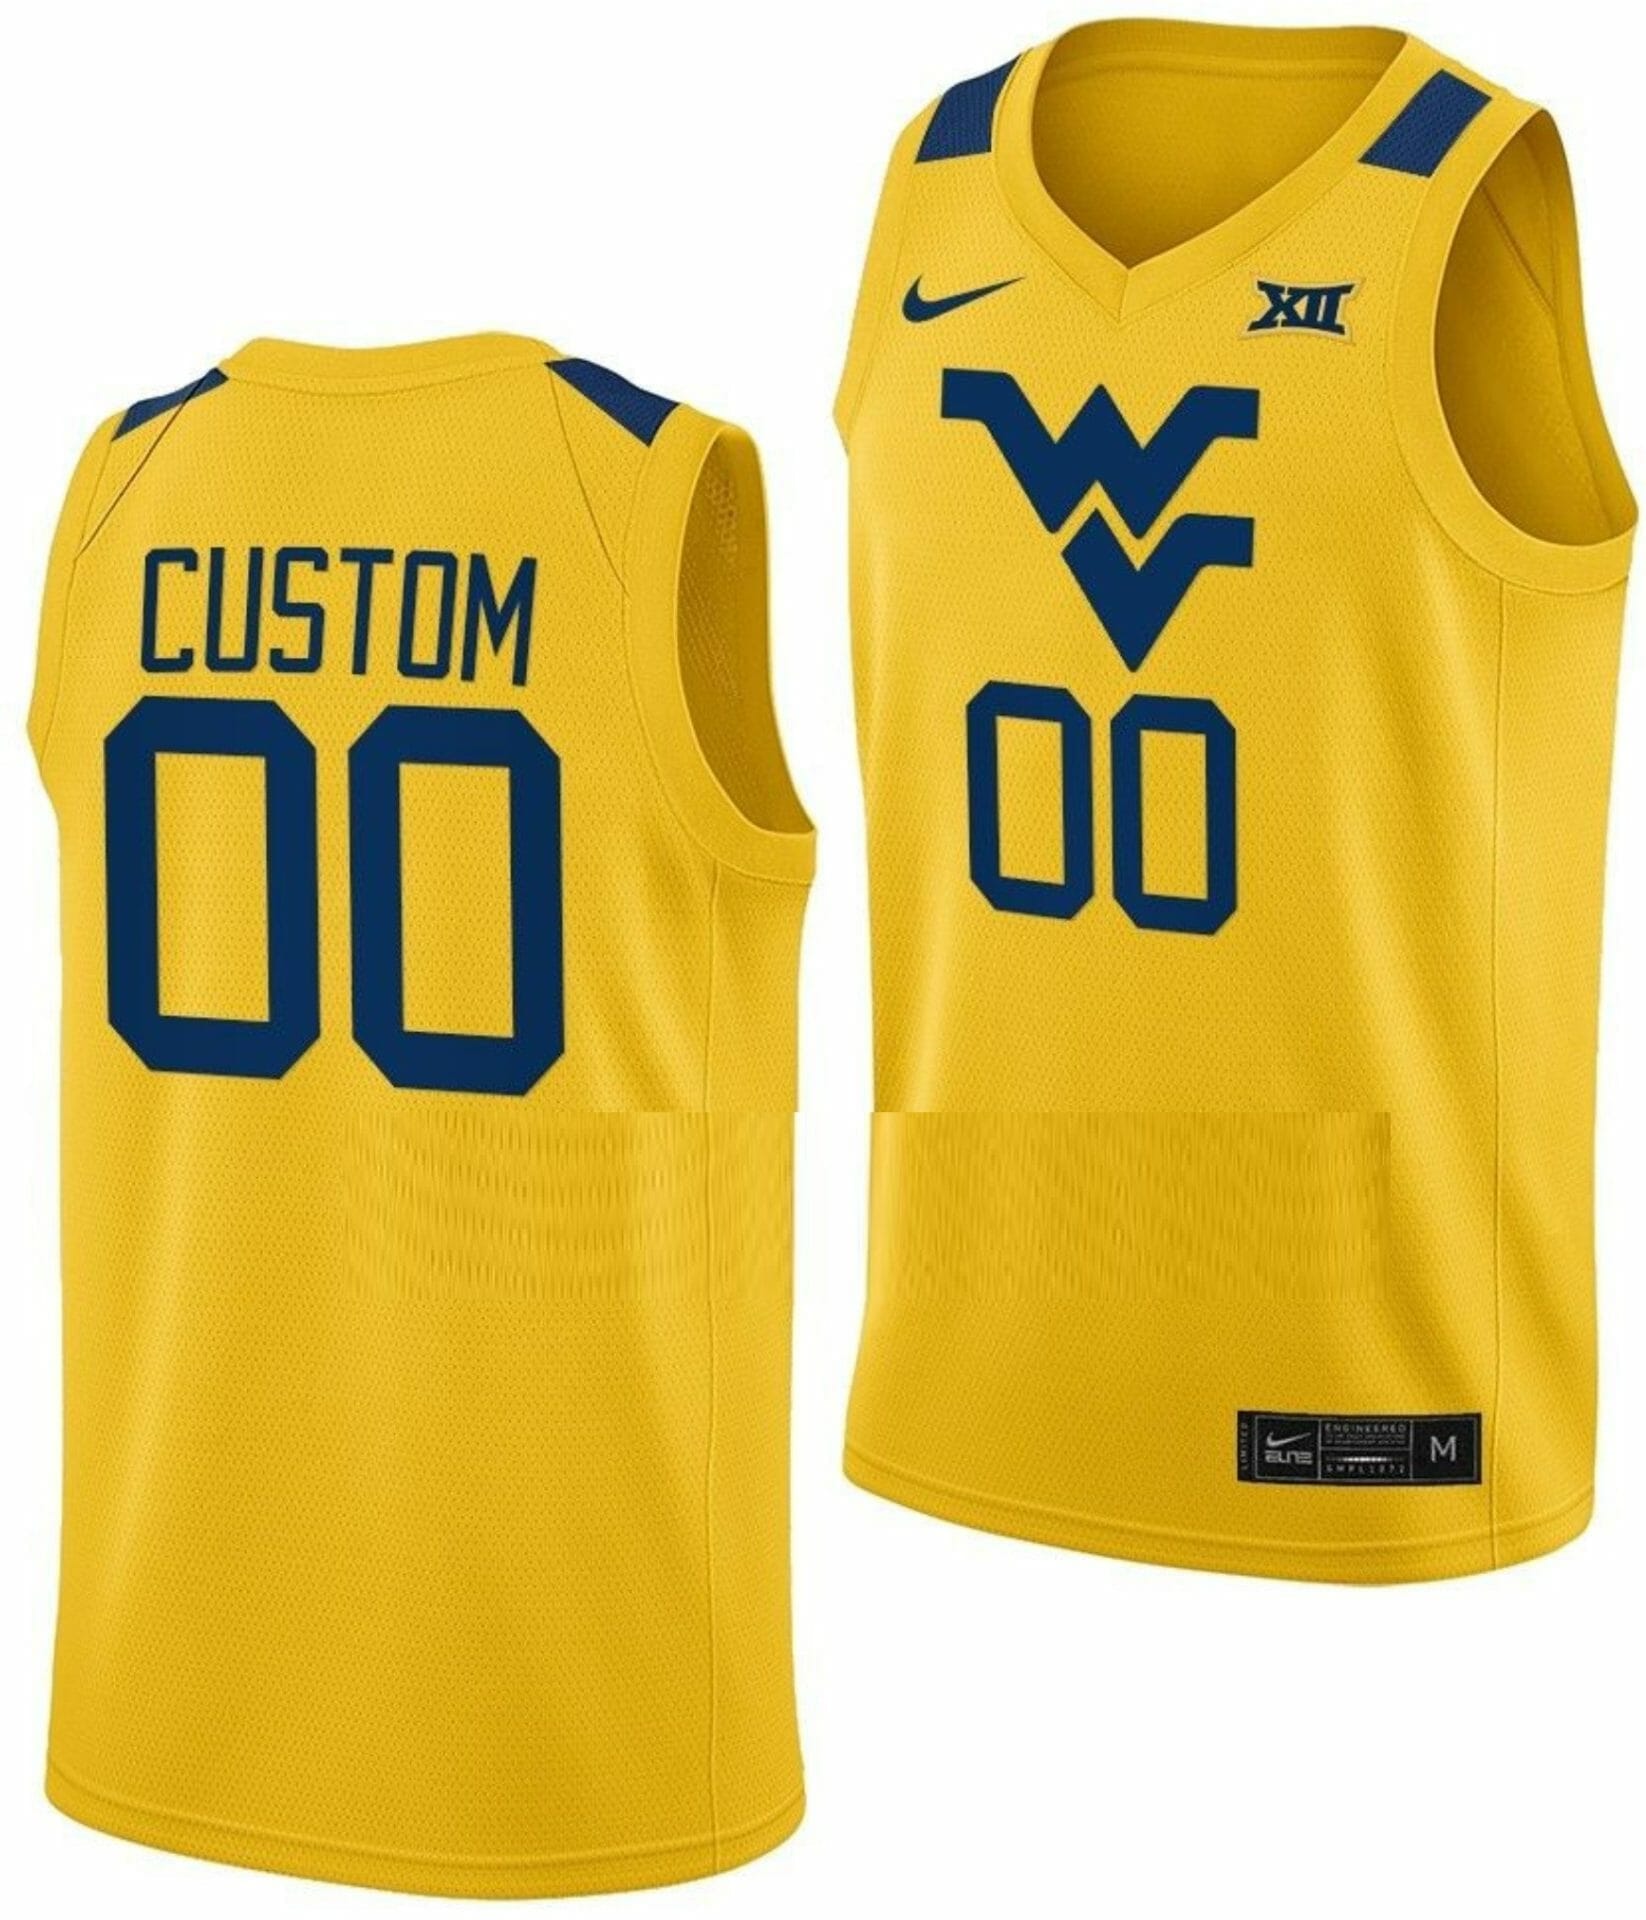 Nike Men's West Virginia Mountaineers #23 Country Roads Gold Replica  Alternate Football Jersey